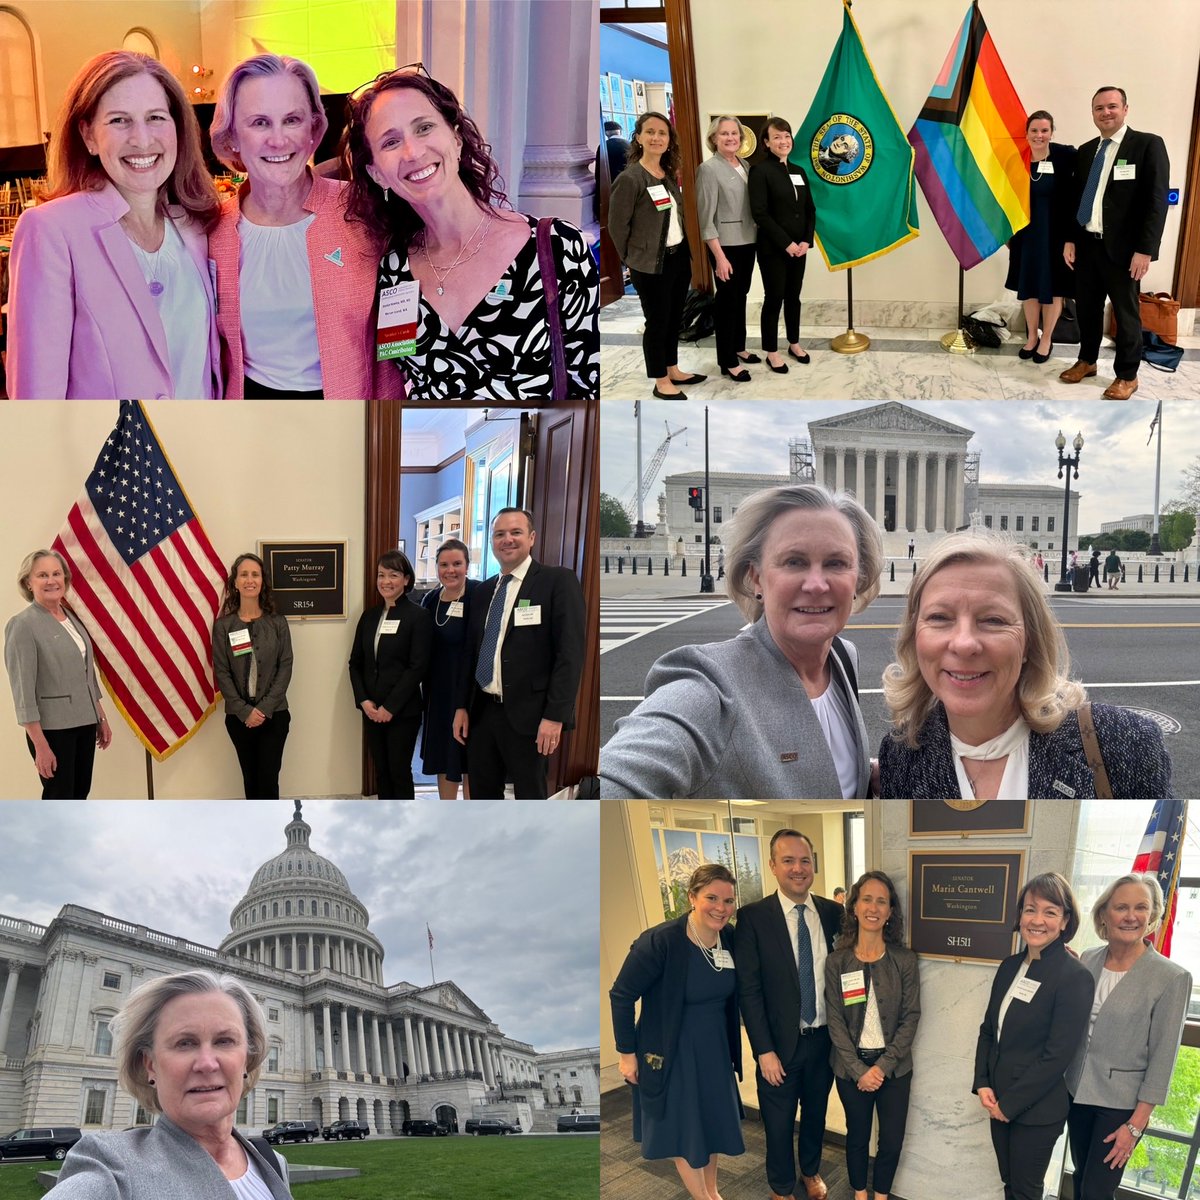 Busy couple of days on the Hill at @asco advocacy summit. Advocating for telehealth, fixes for drug shortages, & @nih @theNCI funding. @JessicaHawleyMD @RobinZo41054013 @drblairirwin @RepKimSchrier